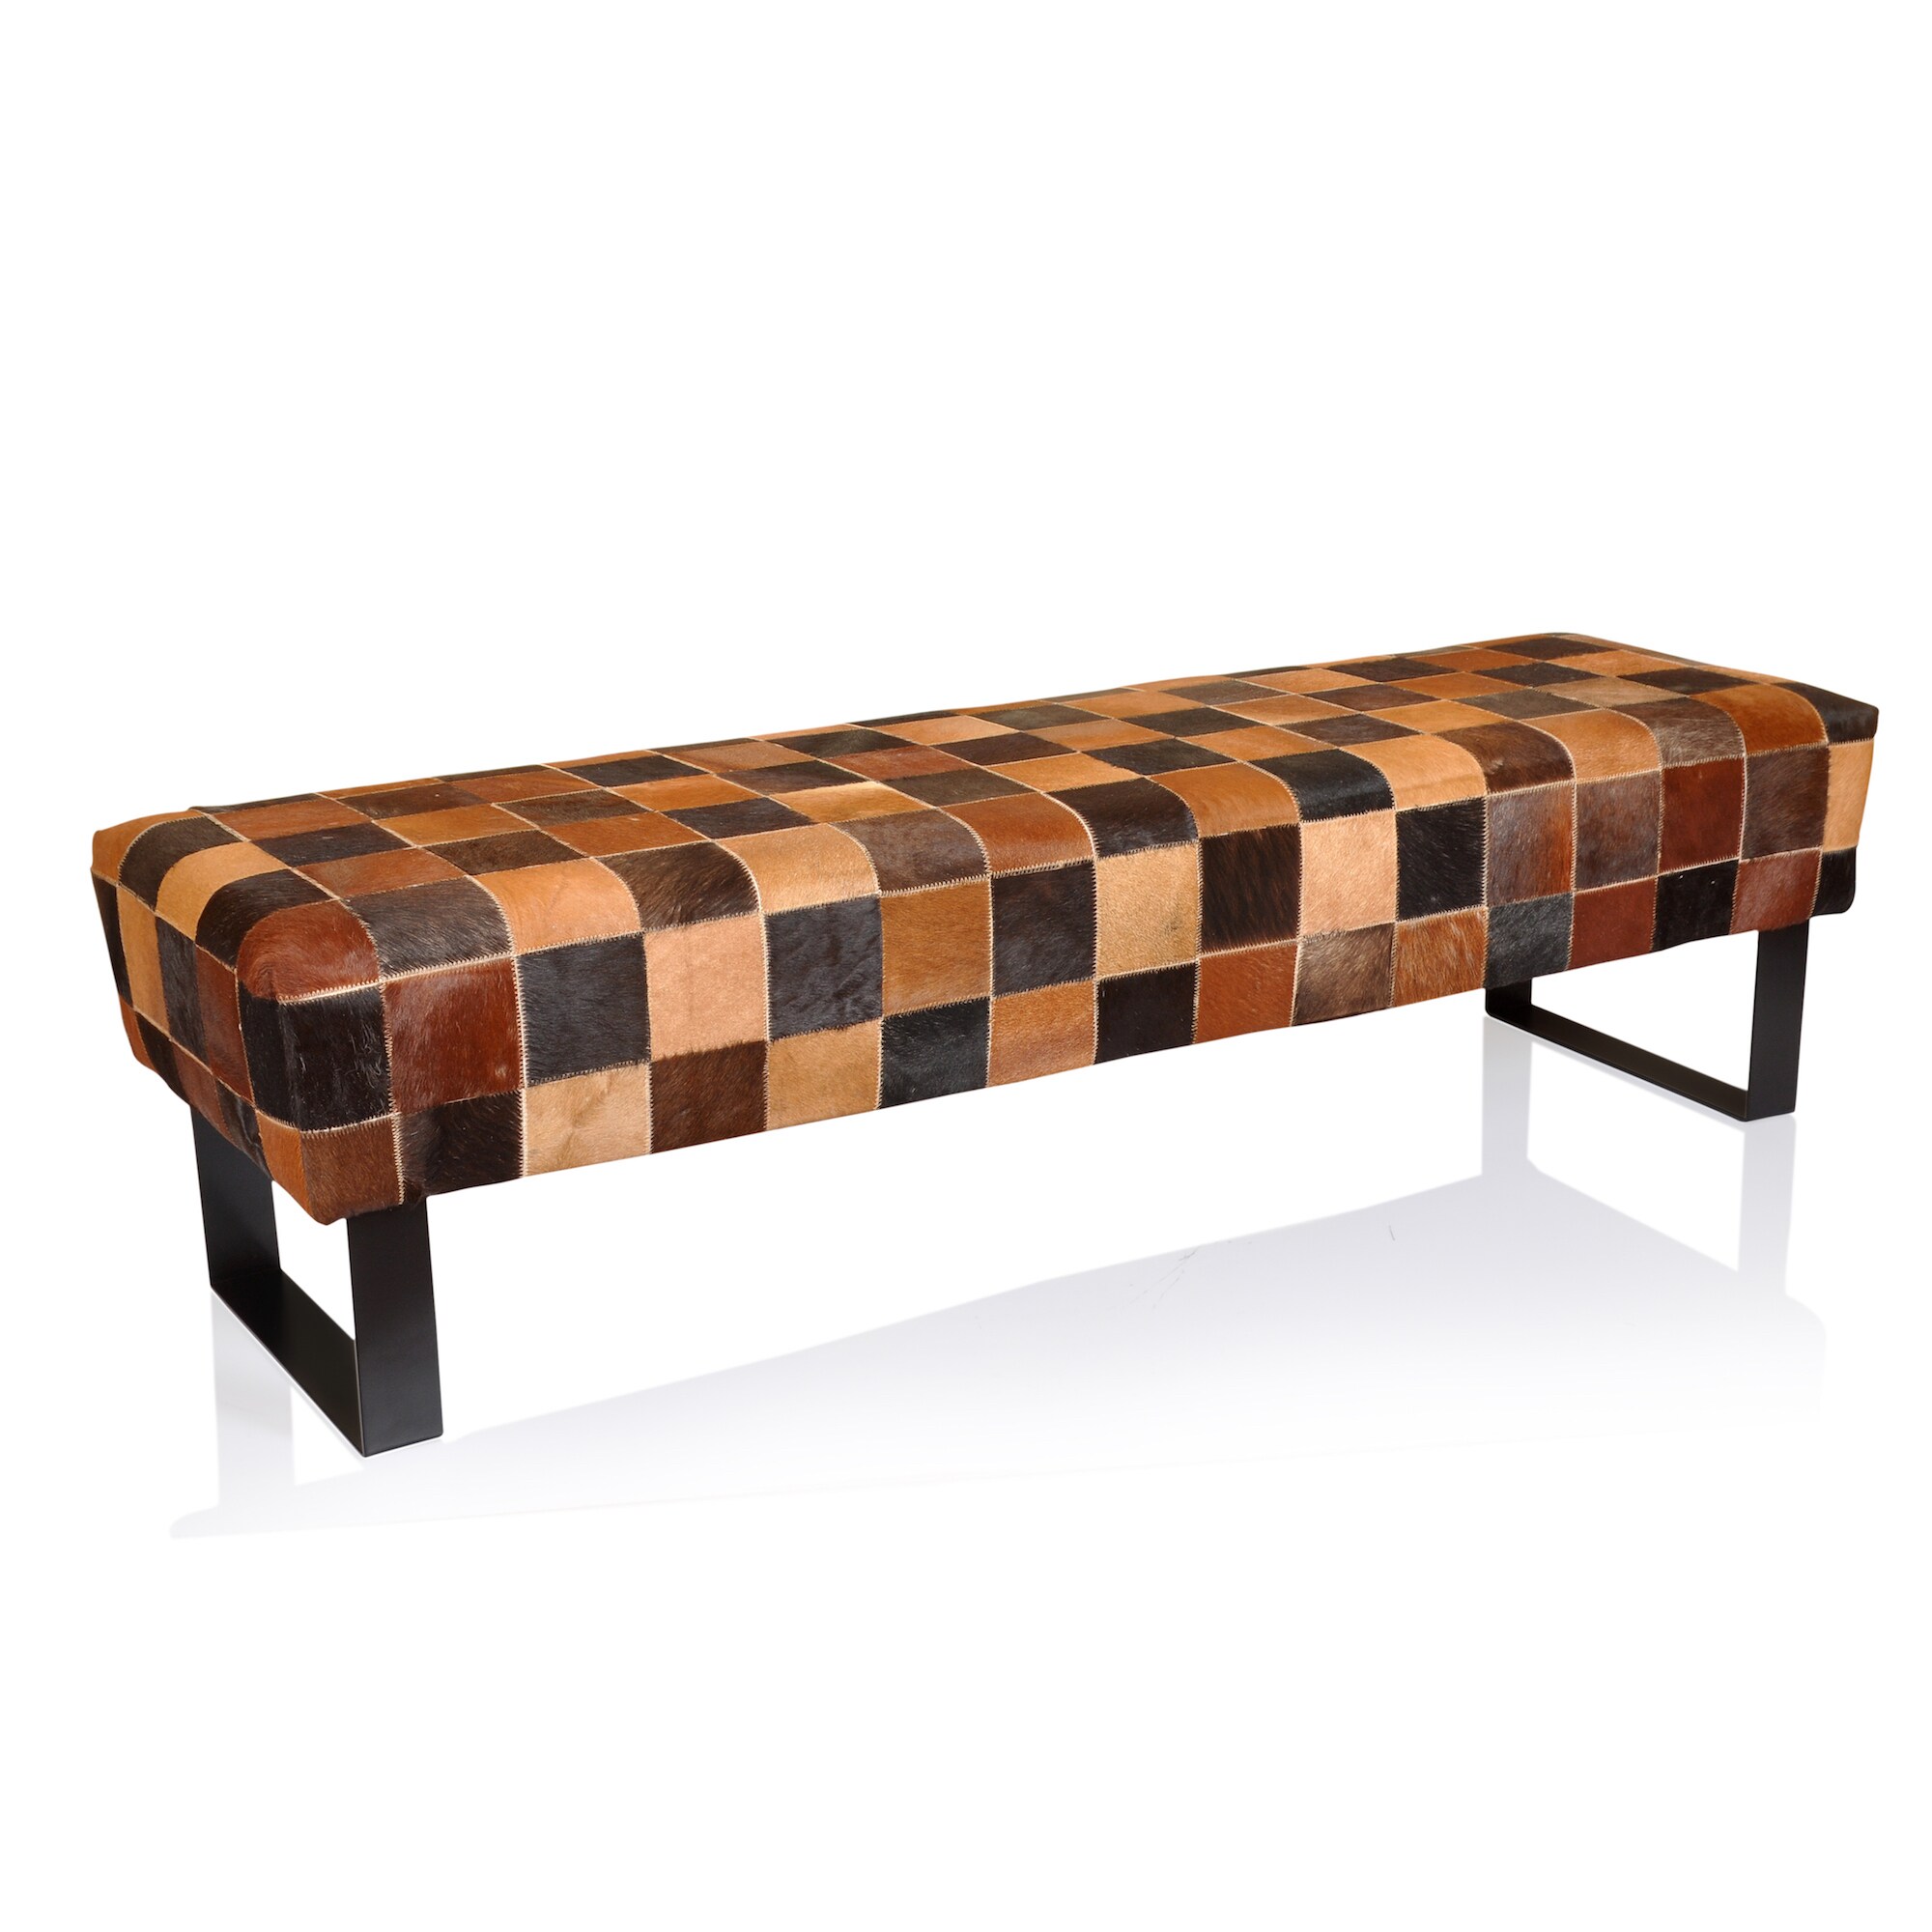 Shop Modern Checker Cowhide Leather Bench Ships To Canada